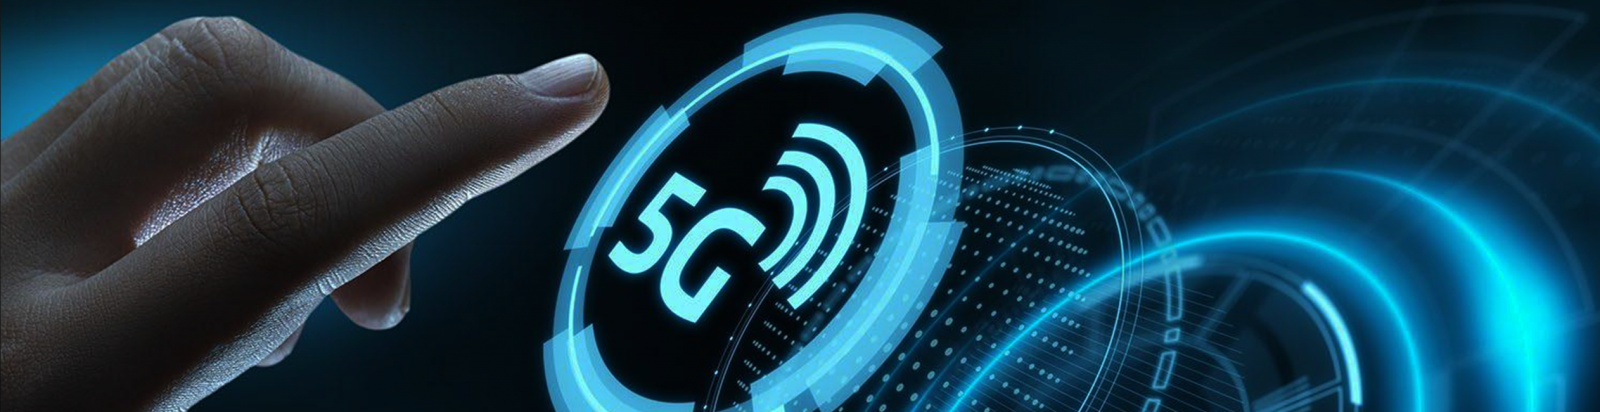 Are you in the process of optimizing the existing 3G/4G Network or Planning 5G Network?